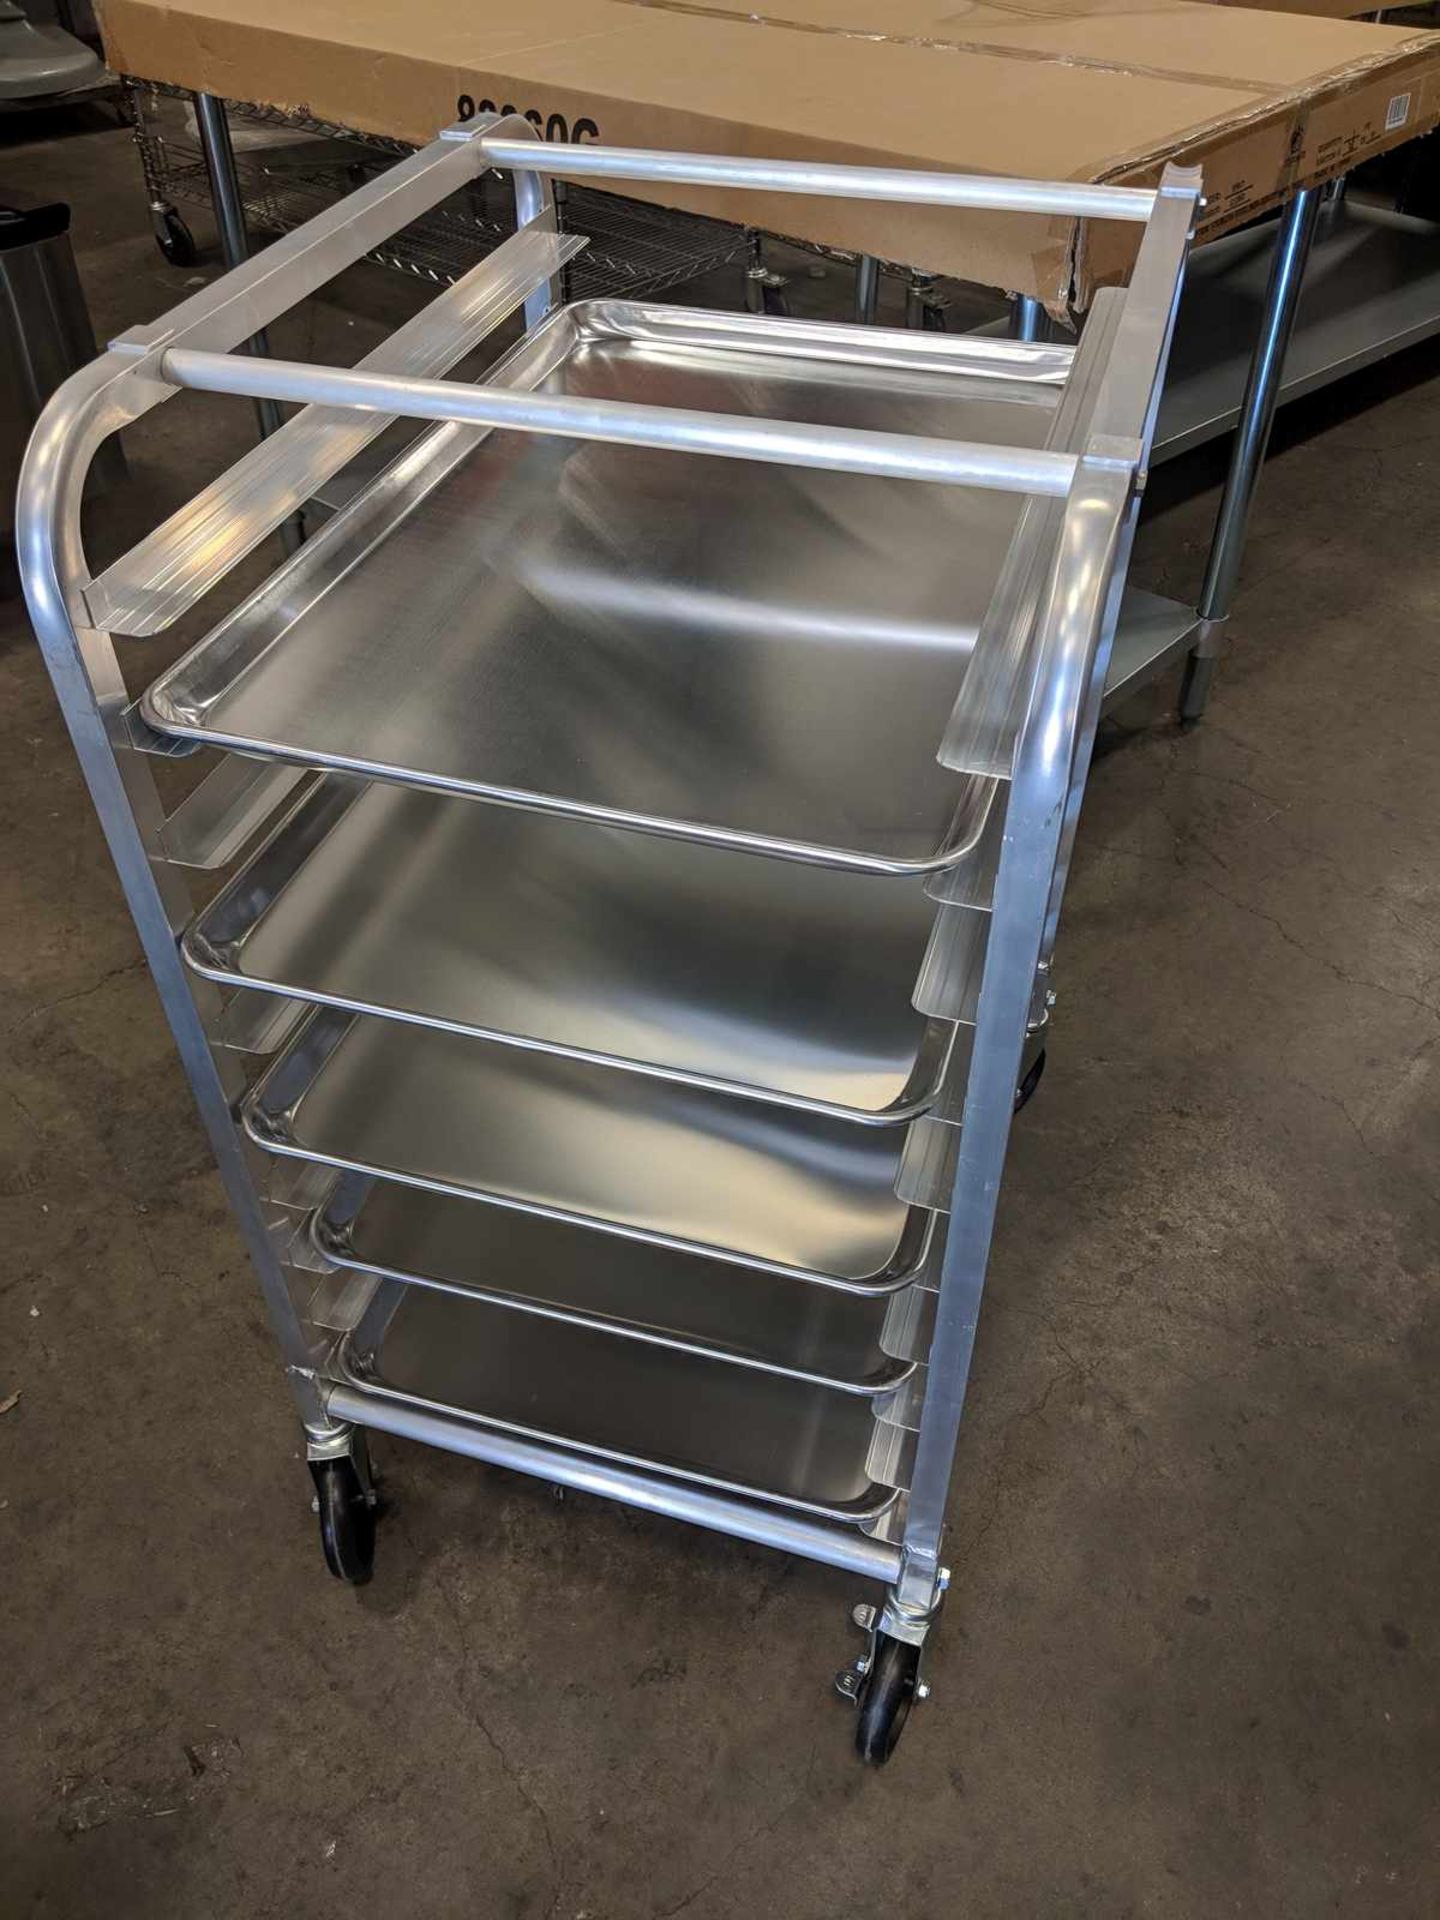 10 Aluminum Bun Pan Rack with Cover, includes 5 pans - Image 2 of 3